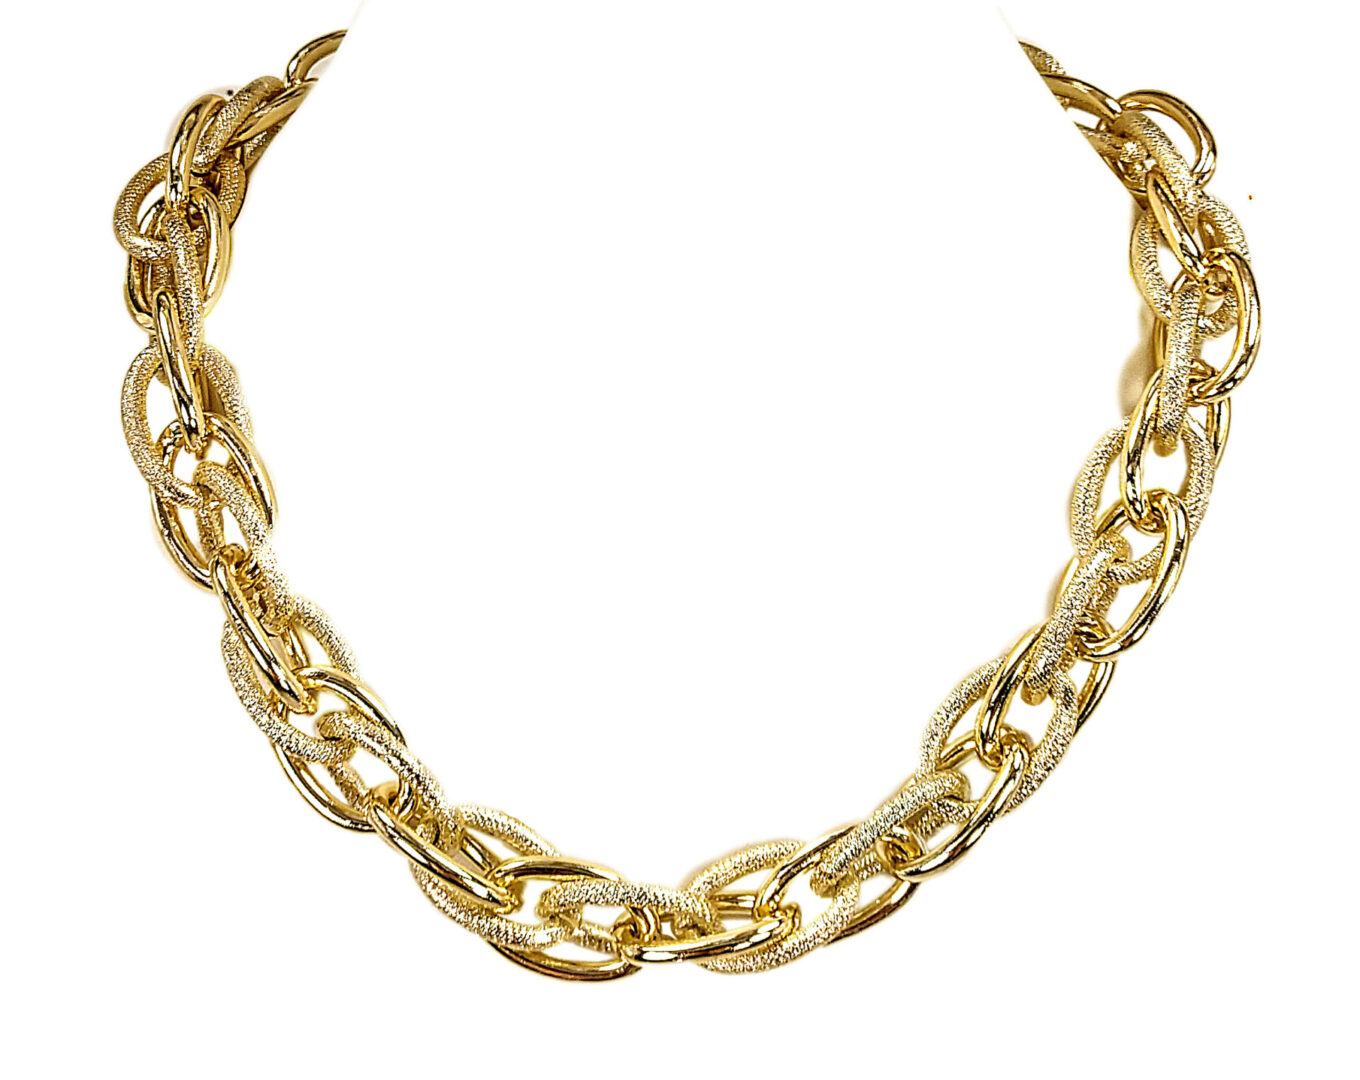 golden necklace with layers of gold chain links